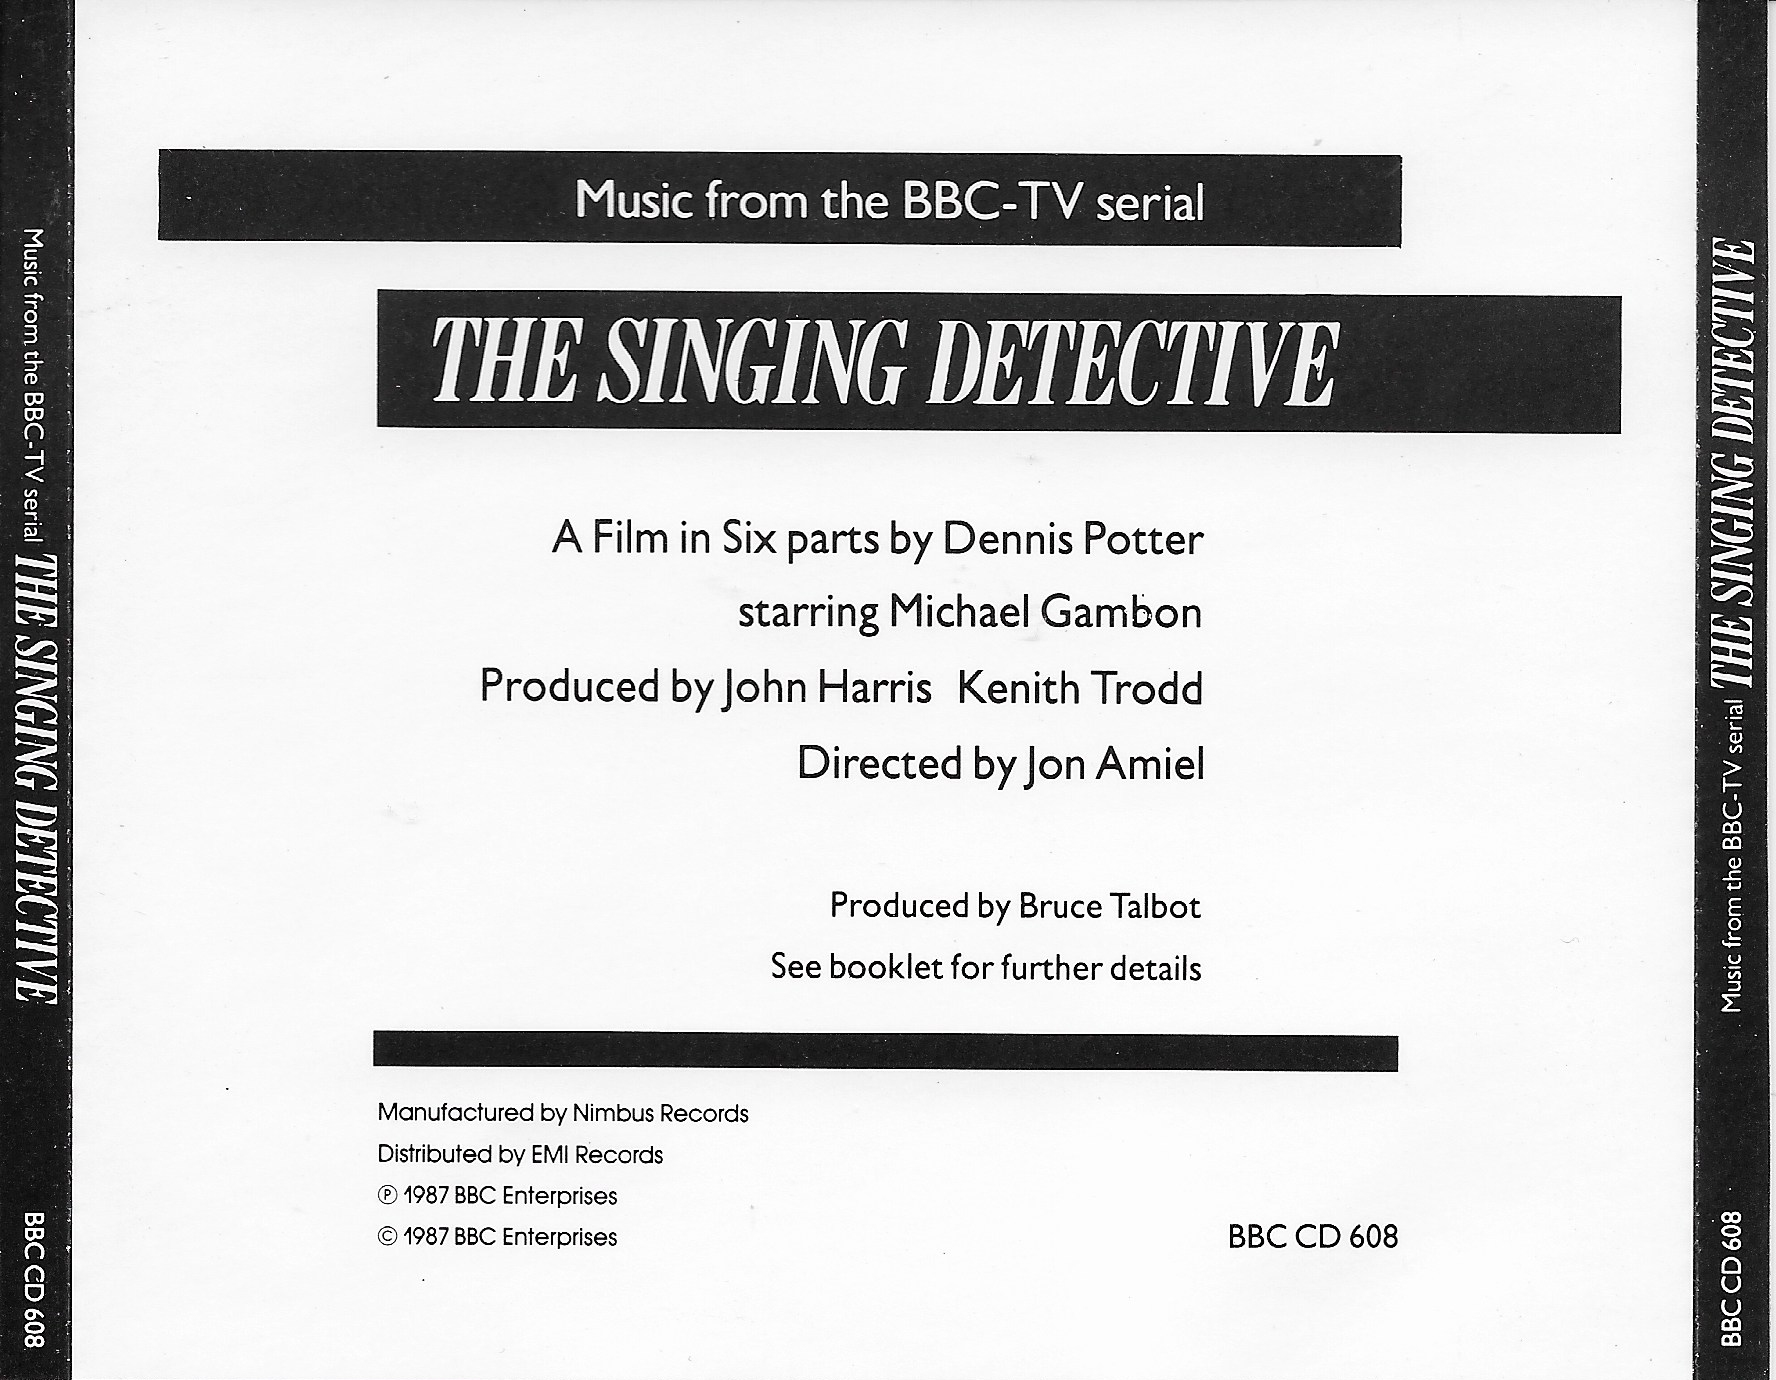 Back cover of BBCCD608